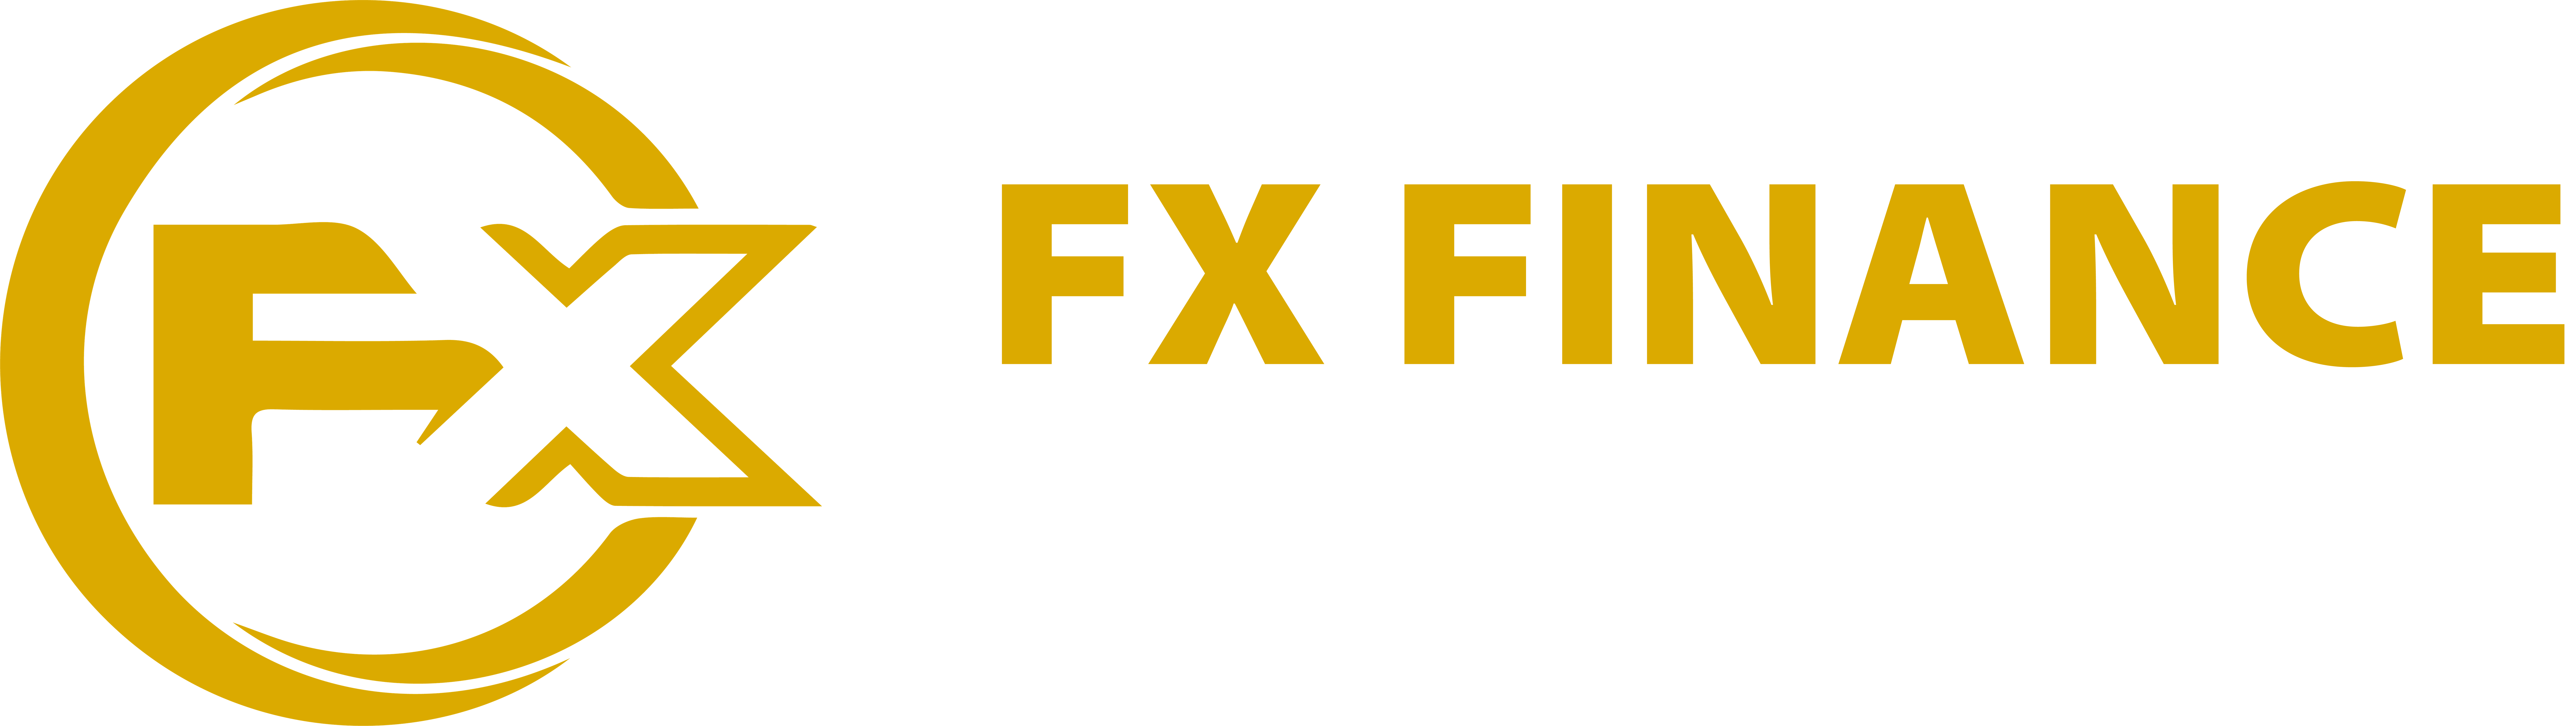 Fx Finance Growth Forex Trading Provider